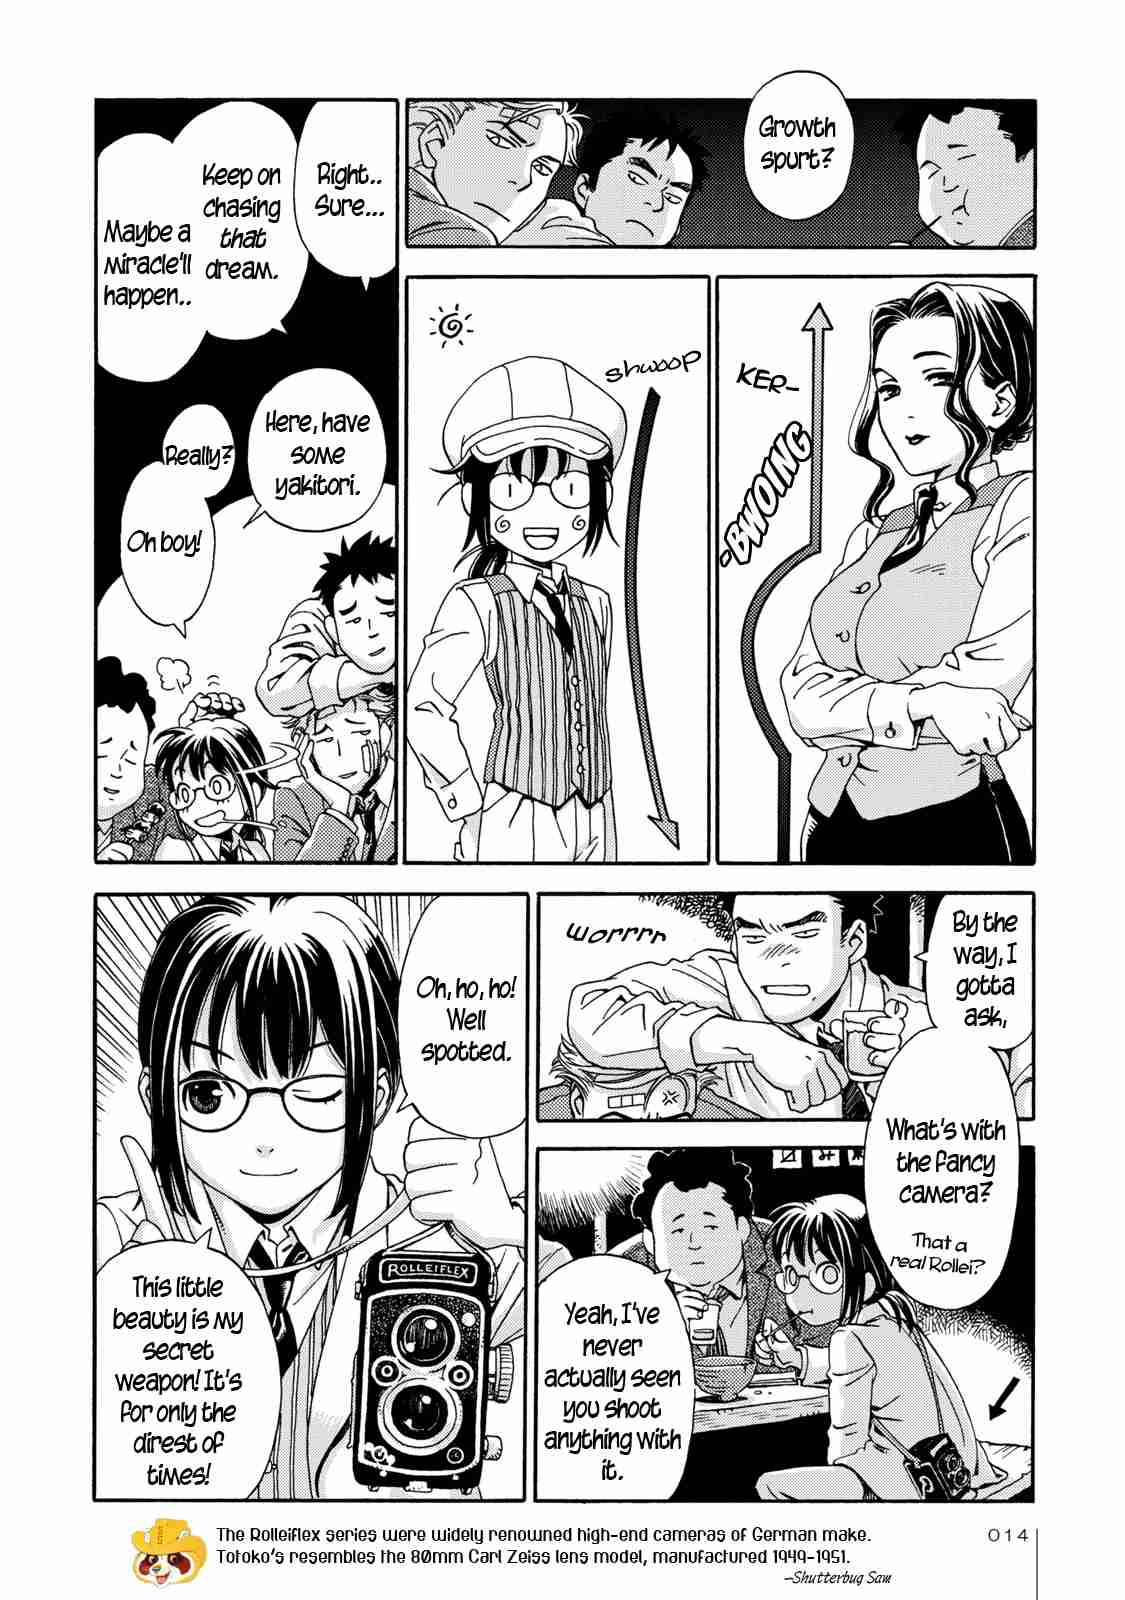 The Adventures of Totoko, Investigative Reporter Vol. 1 Ch. 1 Totoko Pursues the Midnight Mask, and The Scoop Search